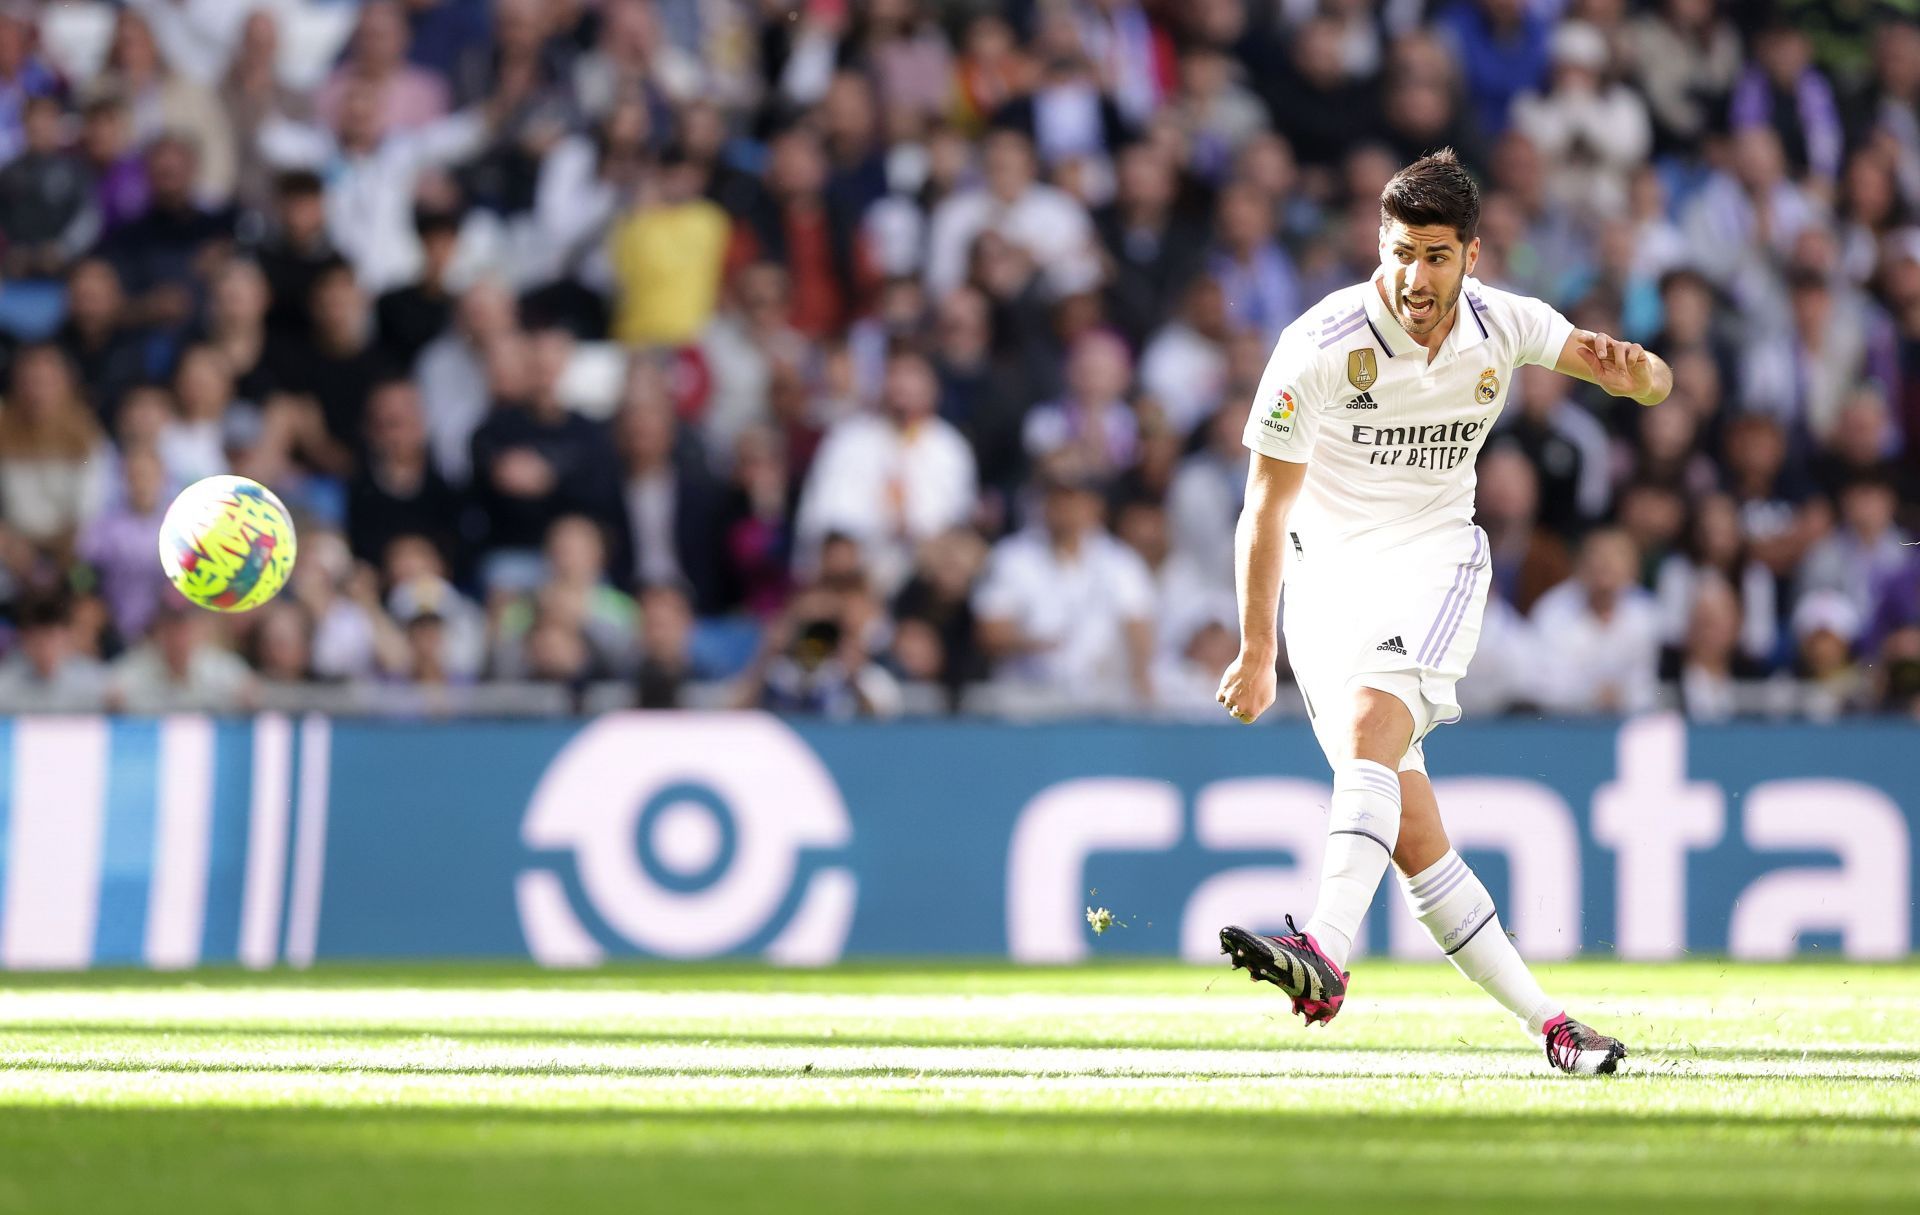 Marco Asensio is likely to leave the Santiago Bernabeu this summer.